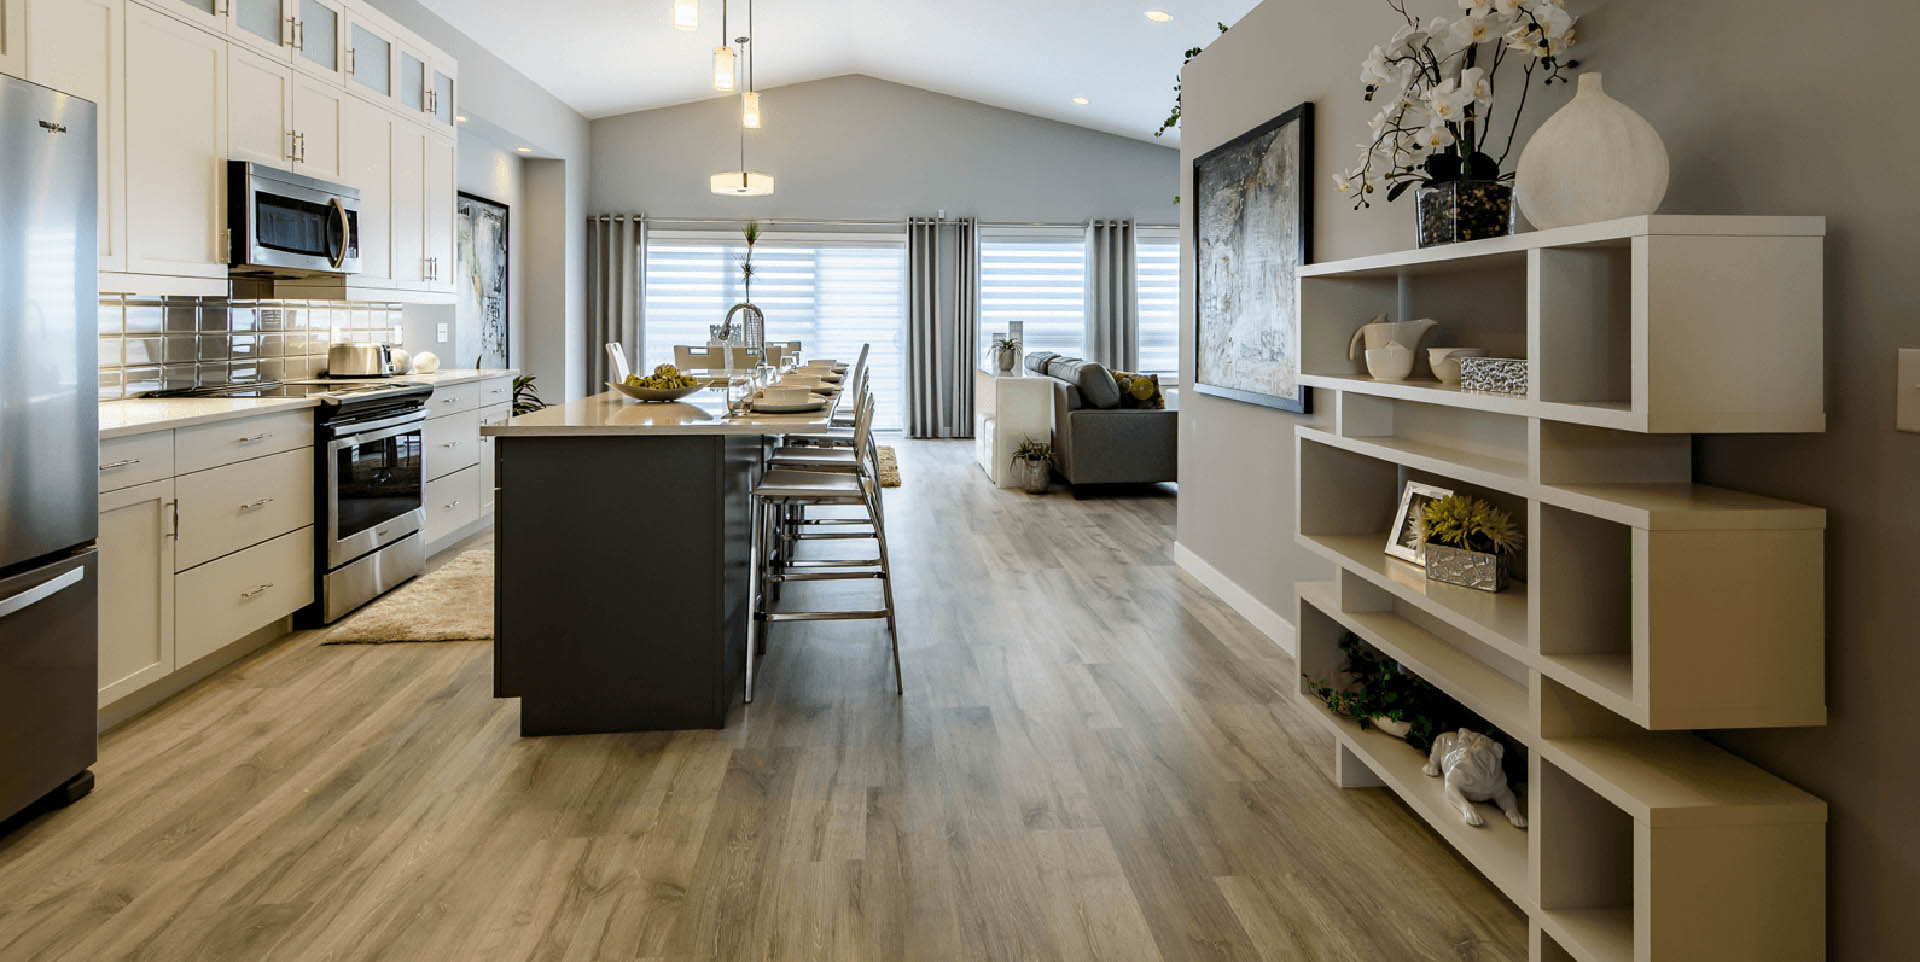 Your Flooring Choices in a New Home Build Vinyl Plank Image